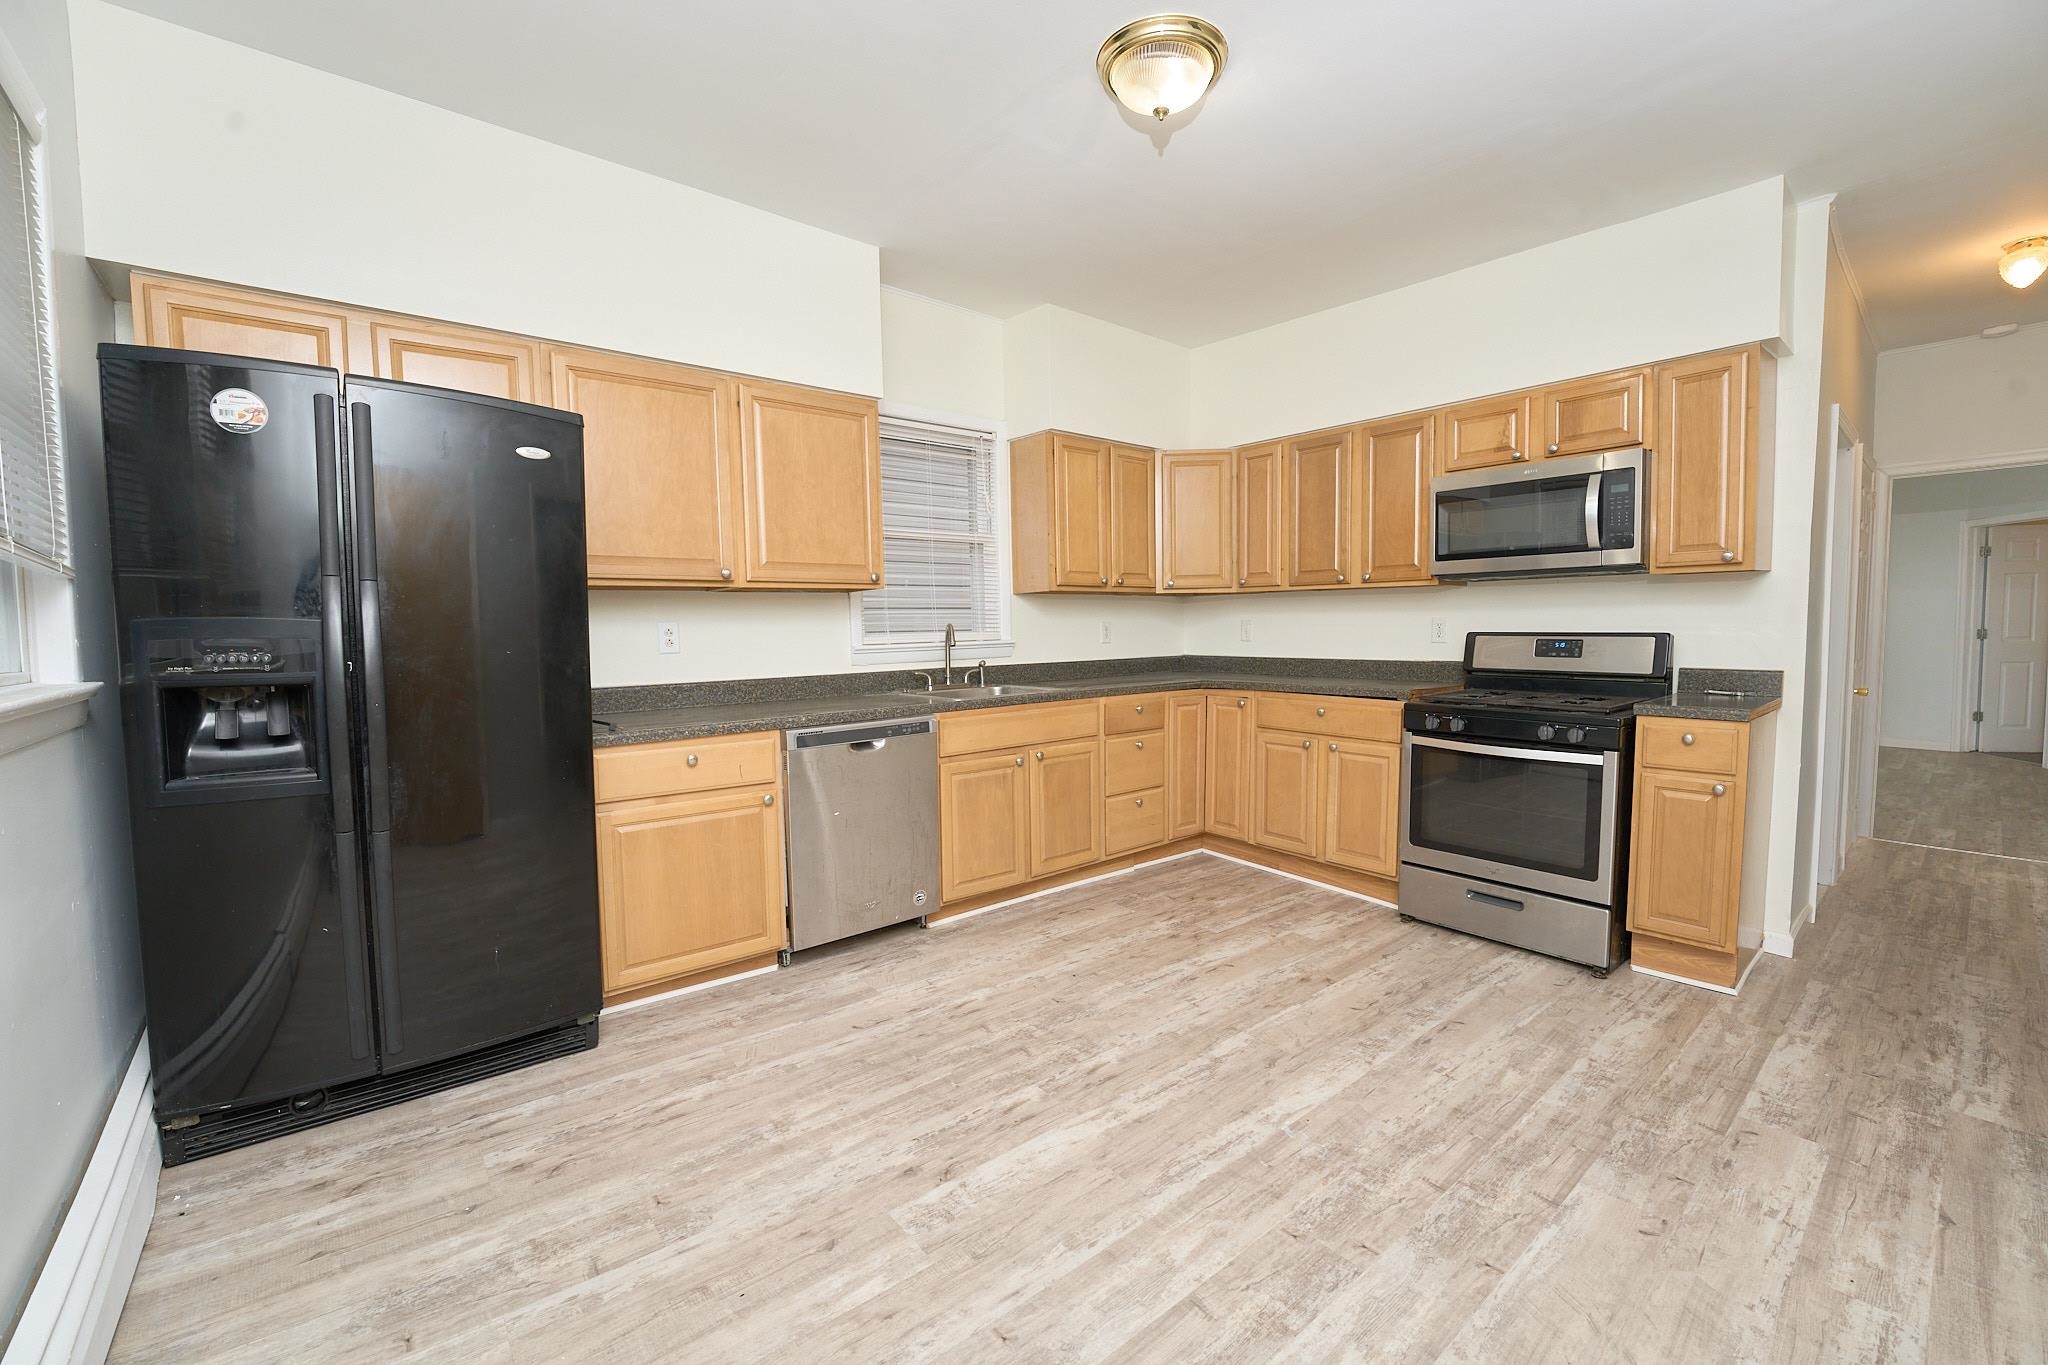 # 240004098 - For Rent in Bayonne NJ